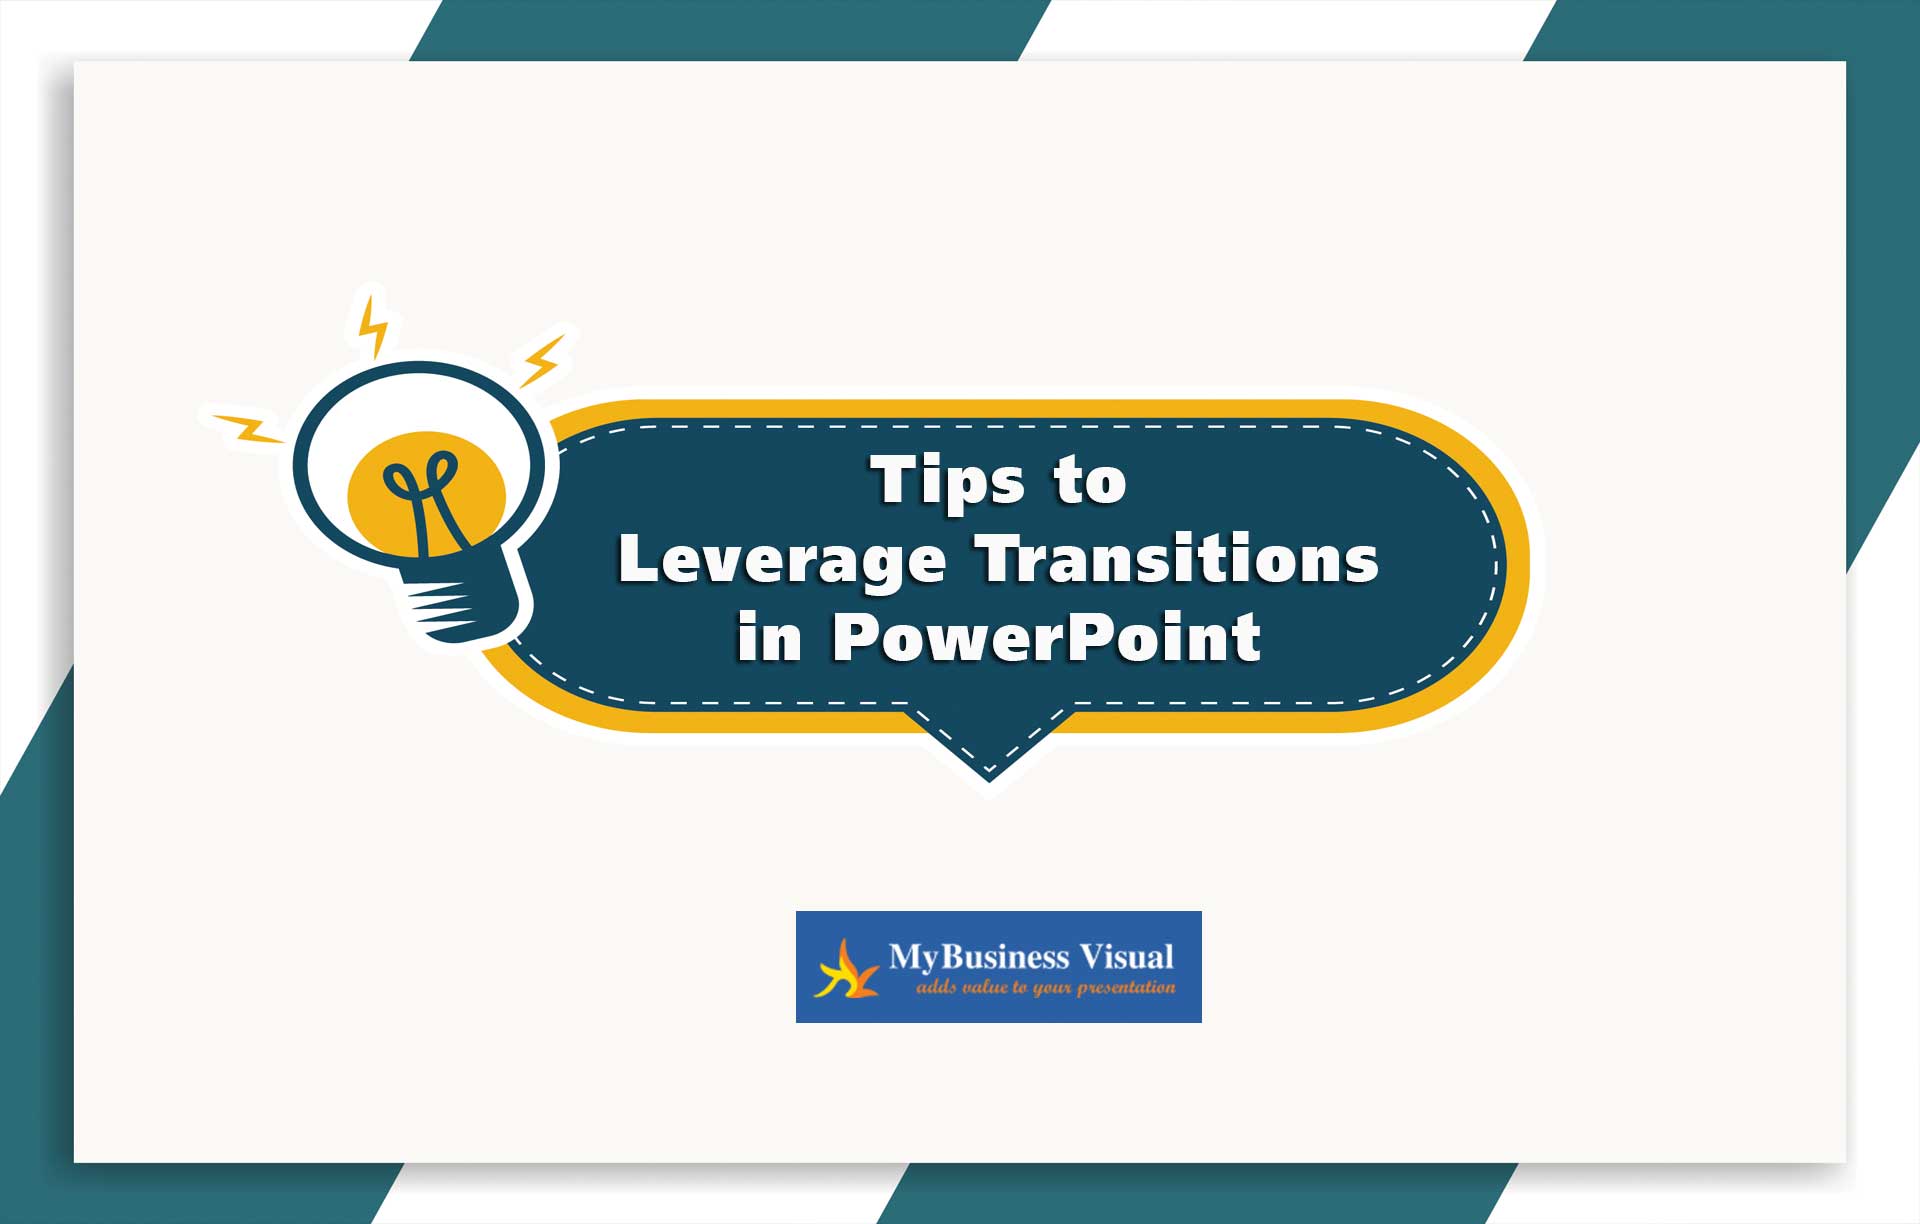 Tips to leverage transitions in PowerPoint presentation to get better results